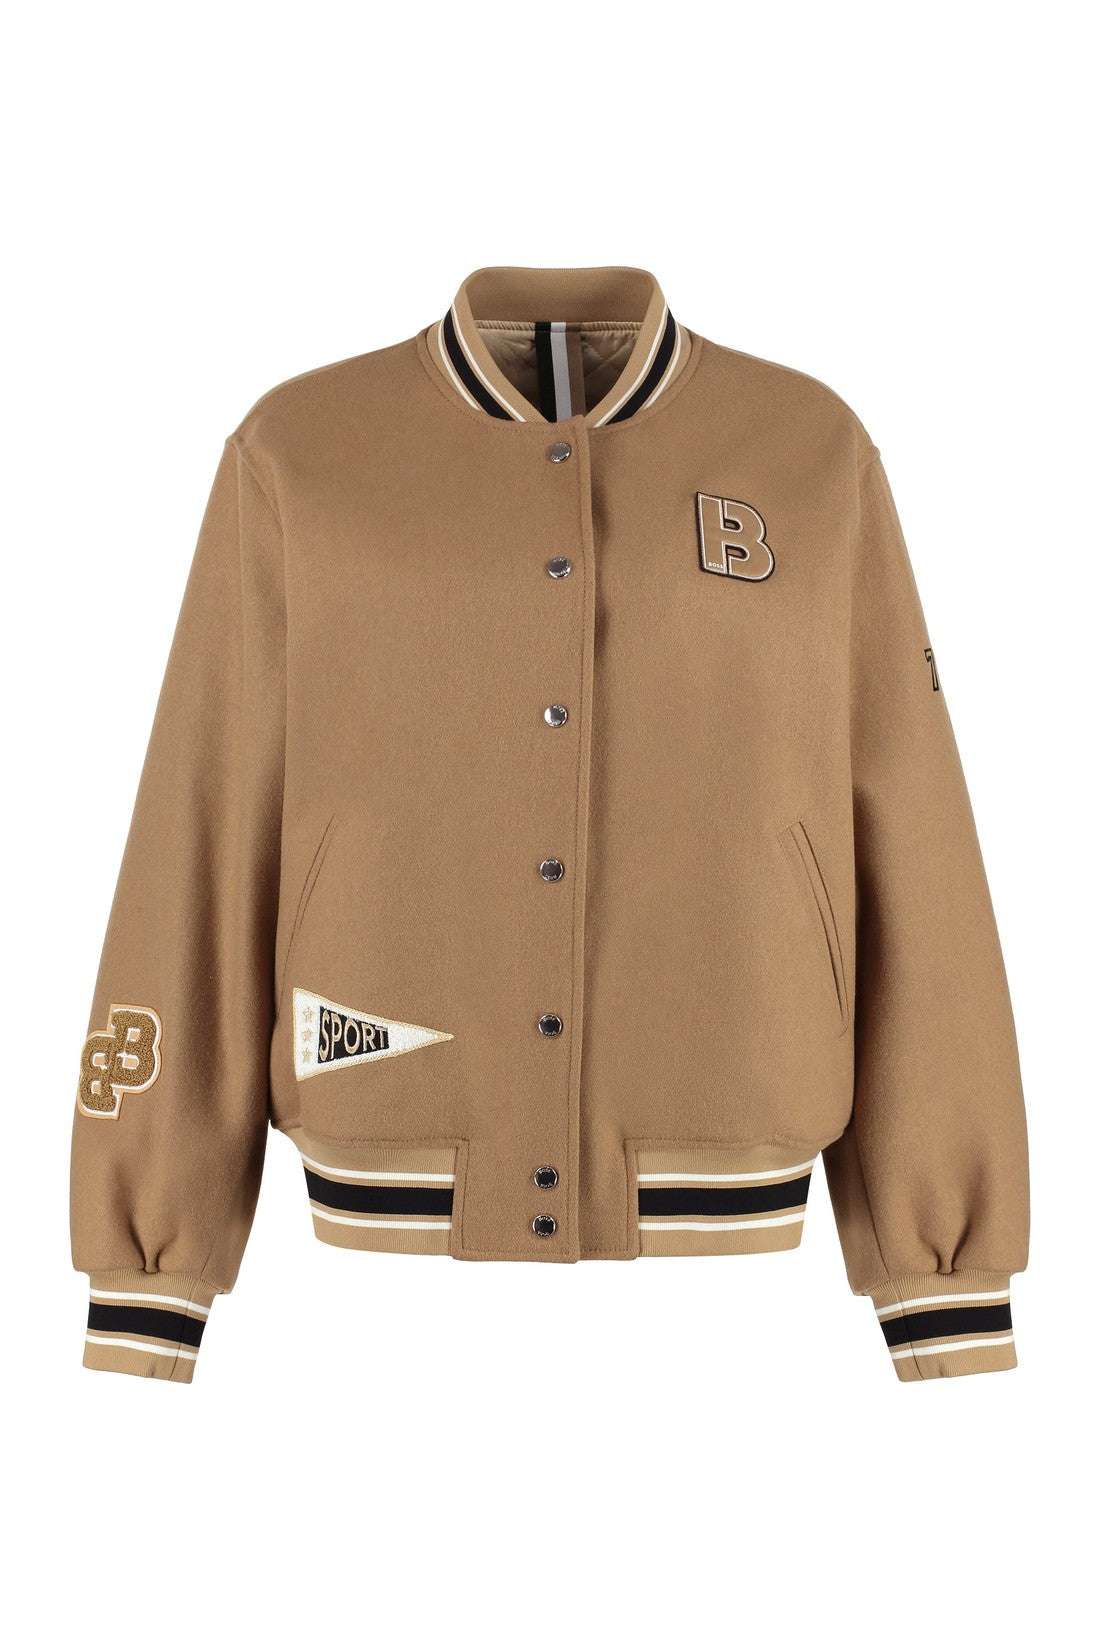 BOSS-OUTLET-SALE-Wool bomber jacket with patch-ARCHIVIST